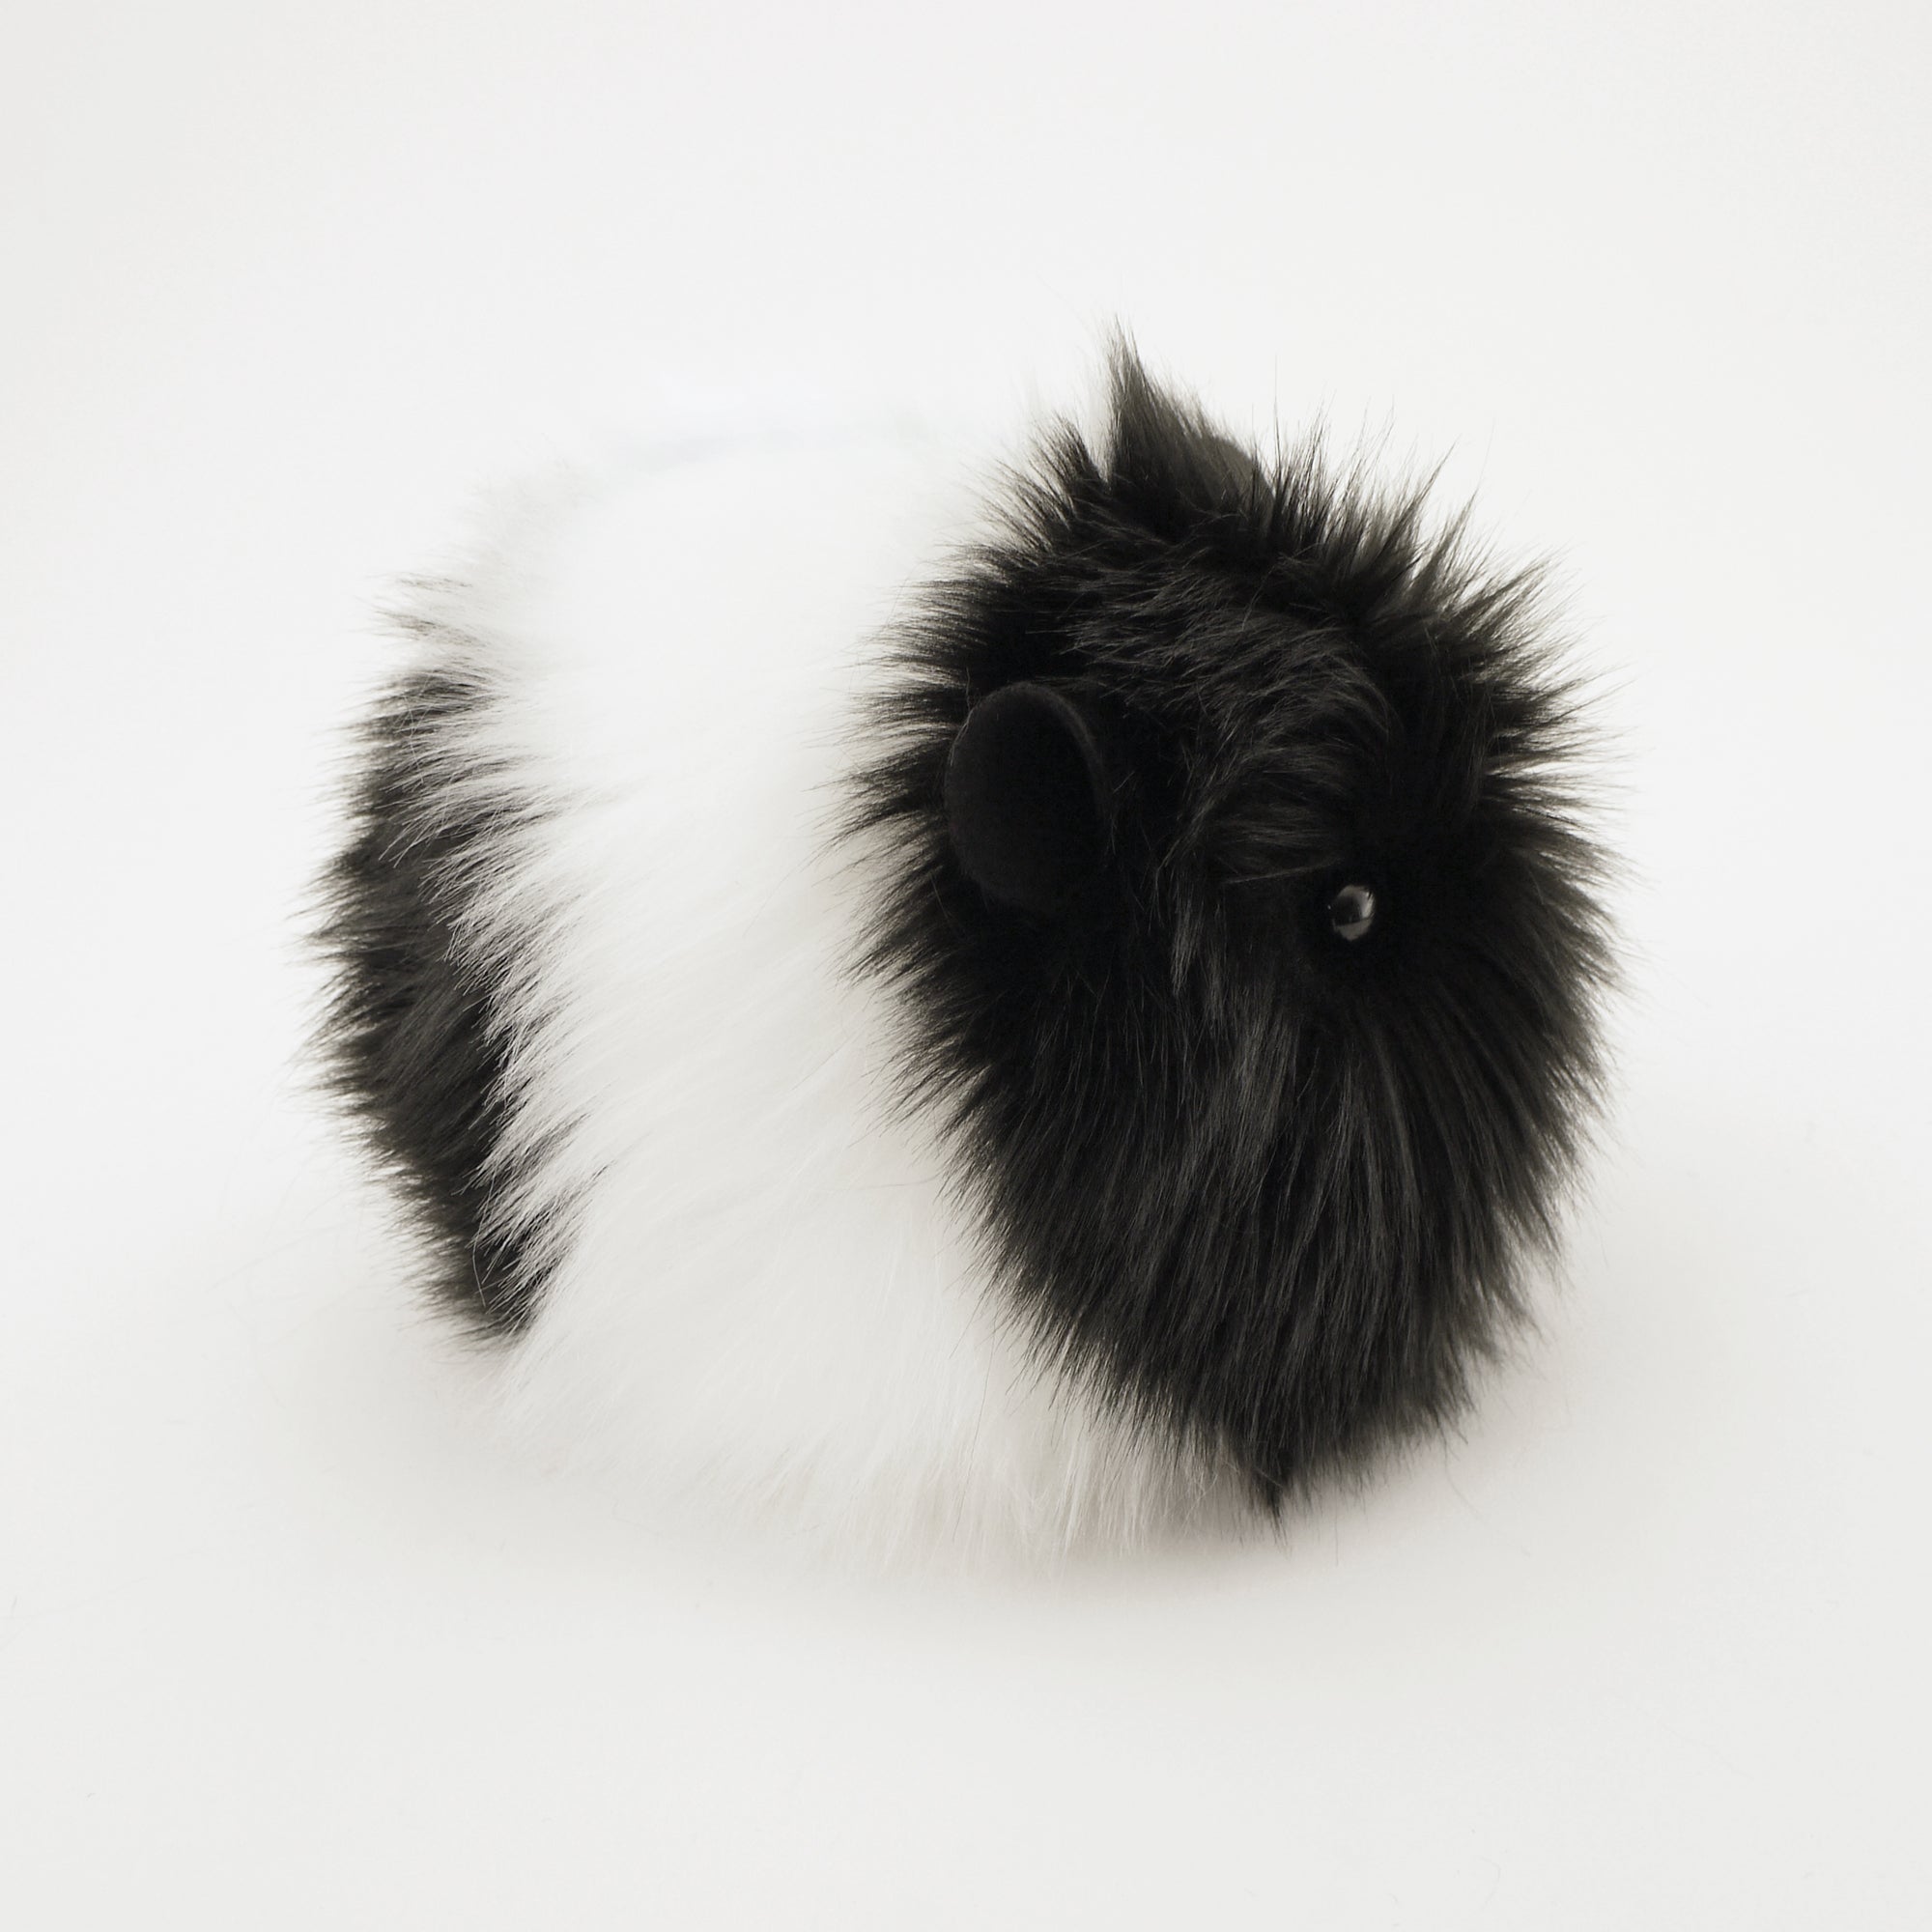 Harley the Black and White Guinea Pig Side View